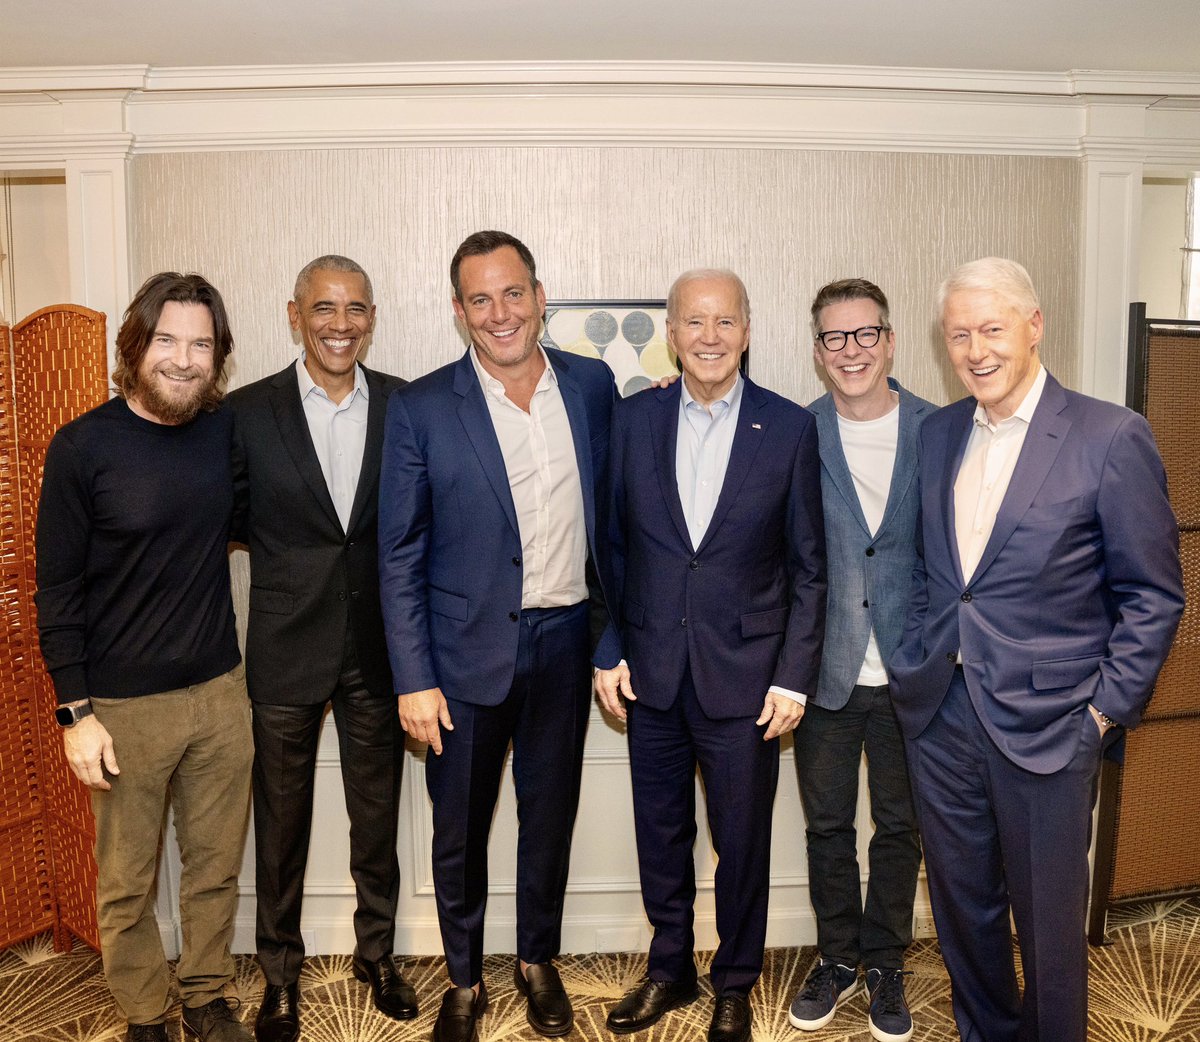 Back in March, @JoeBiden, @BillClinton and I sat down with three real icons – the hosts of @SmartLess – to talk about everything from the economy and gun violence, to what we miss about being in office and the importance of sending Joe and
@BarackObama